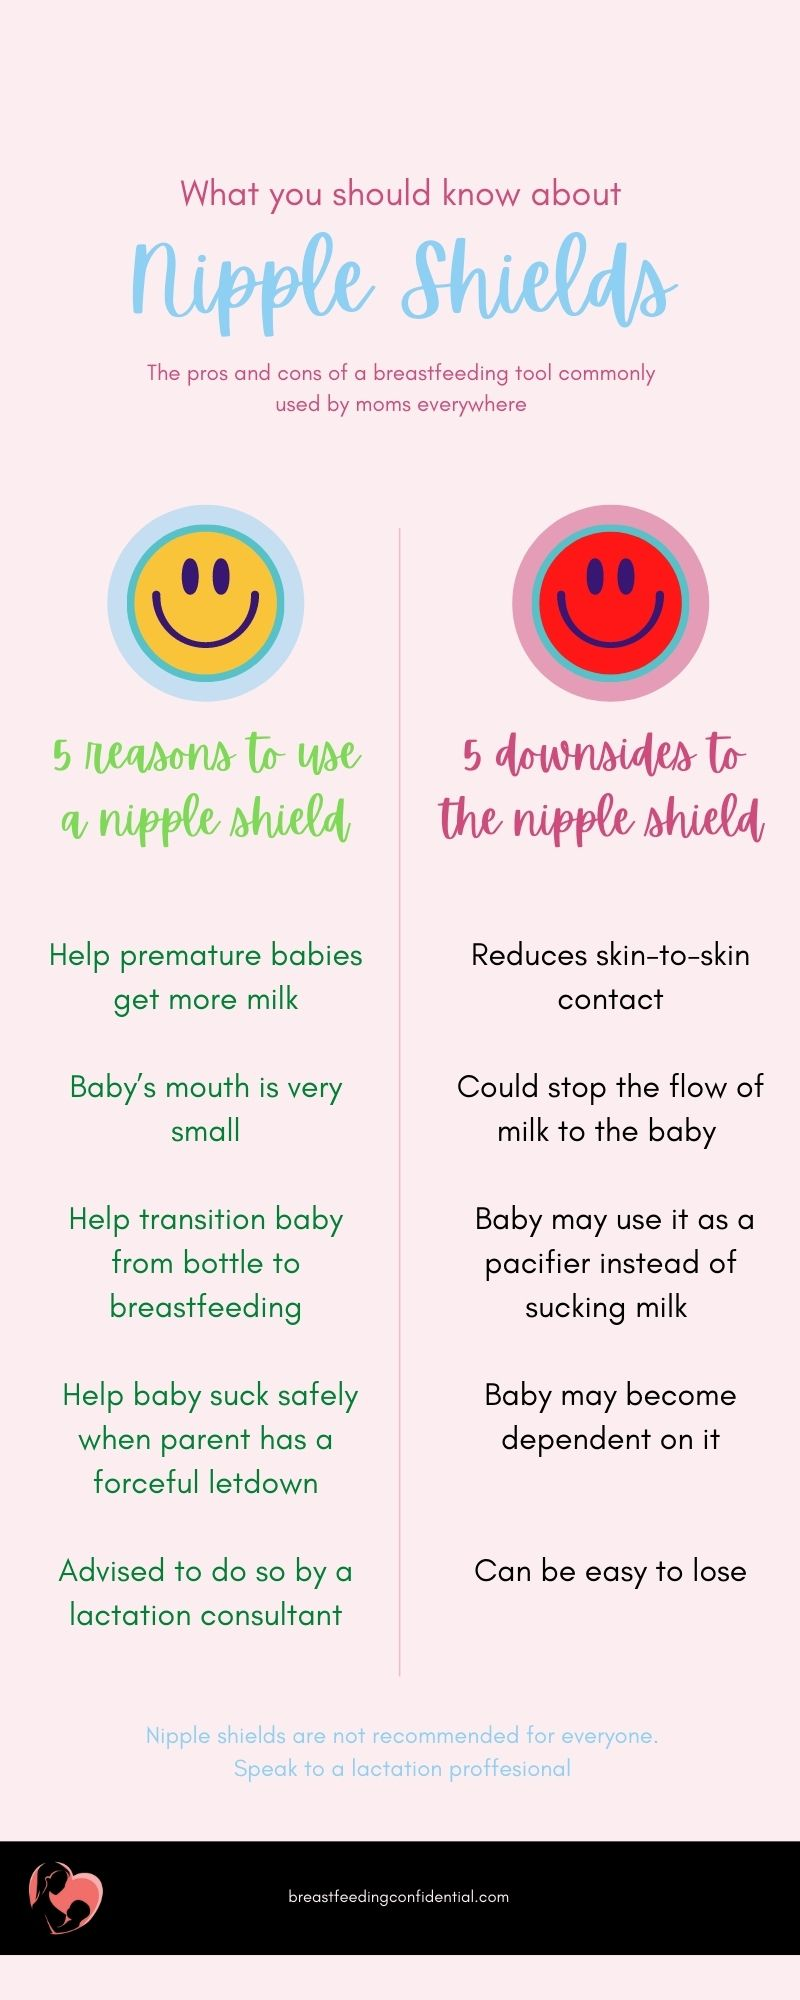 Nipple shield pros and cons. Speak to a lactation consultant if you think you need a nipple shield